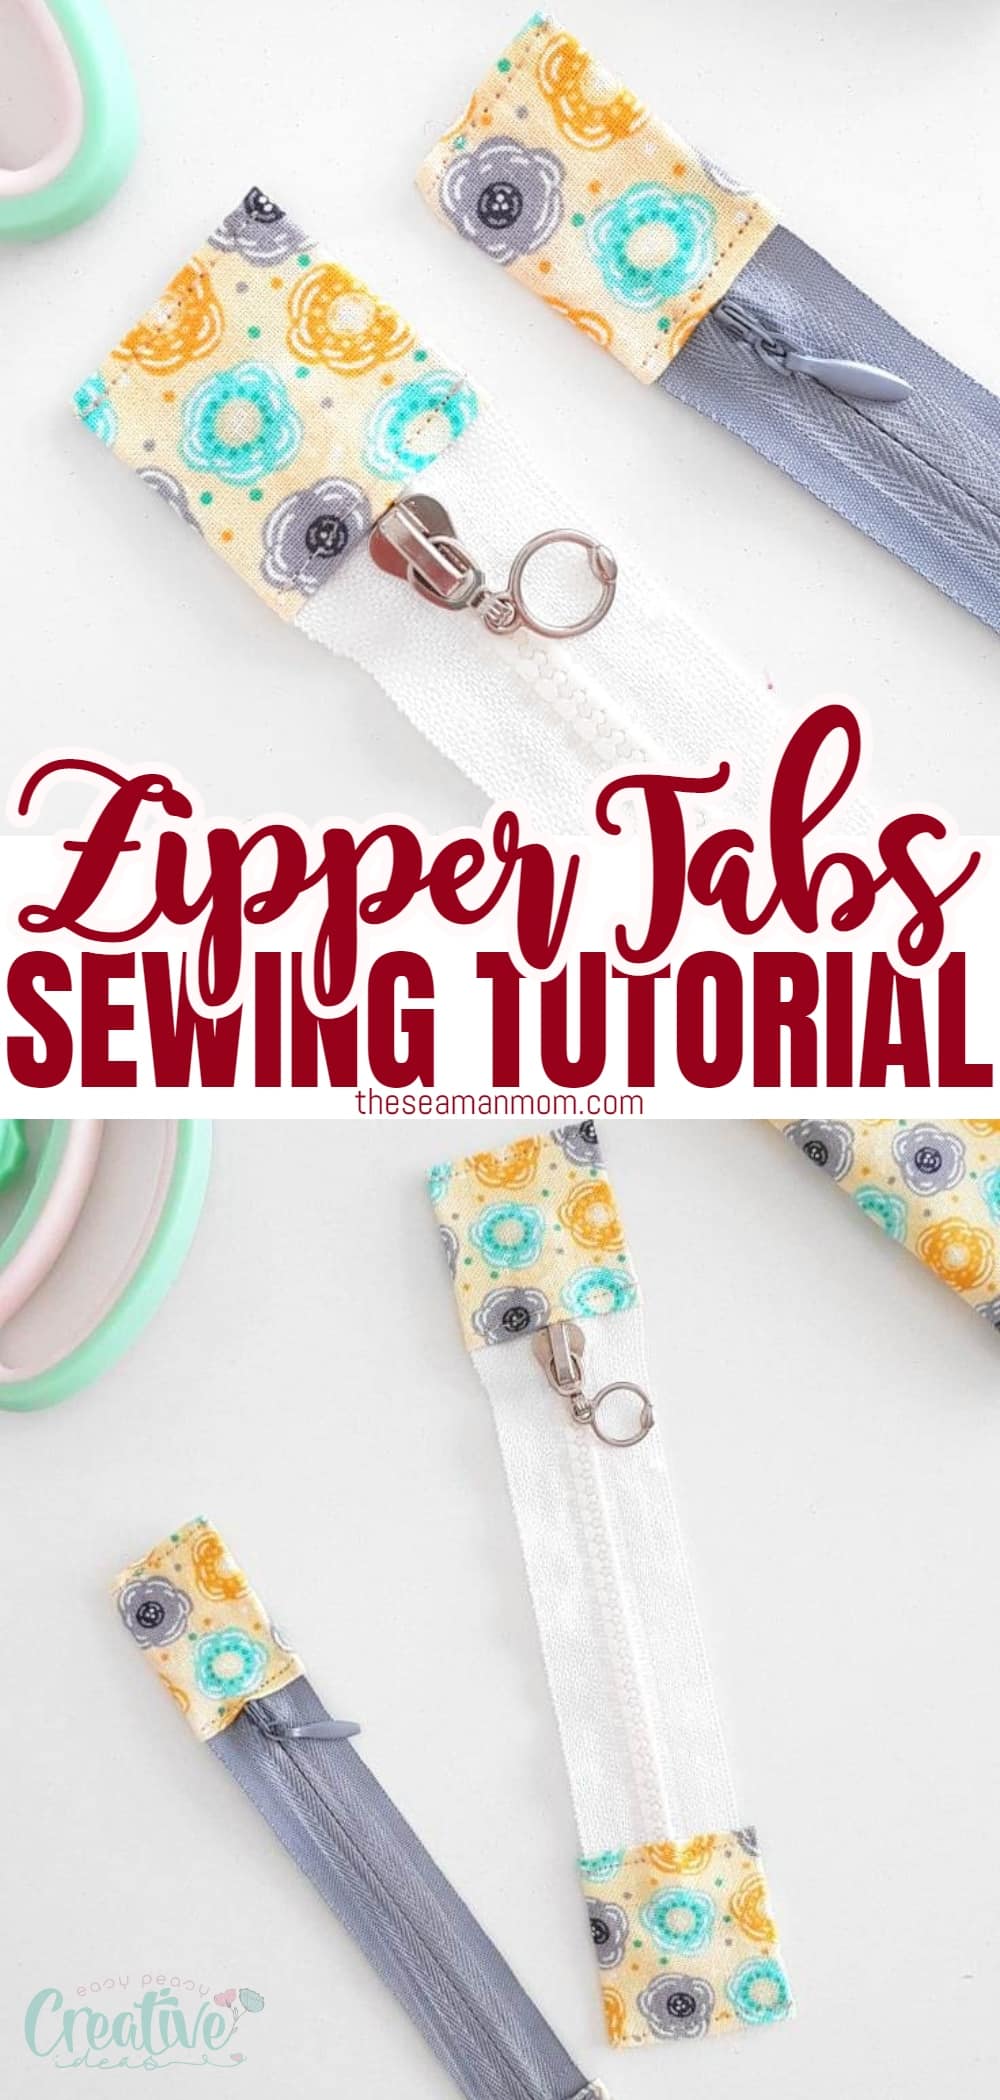 Zipper tabs are a fantastic solution for adjusting the length of zippers while adding a unique and personalized touch. In today's tutorial, I will show you how to make zipper tabs and guide you through an incredibly simple and straightforward process. This way, you won't have to spend ages searching for the perfect zipper. Say goodbye to the frustration and hello to effortless customization with zipper tabs! via @petroneagu